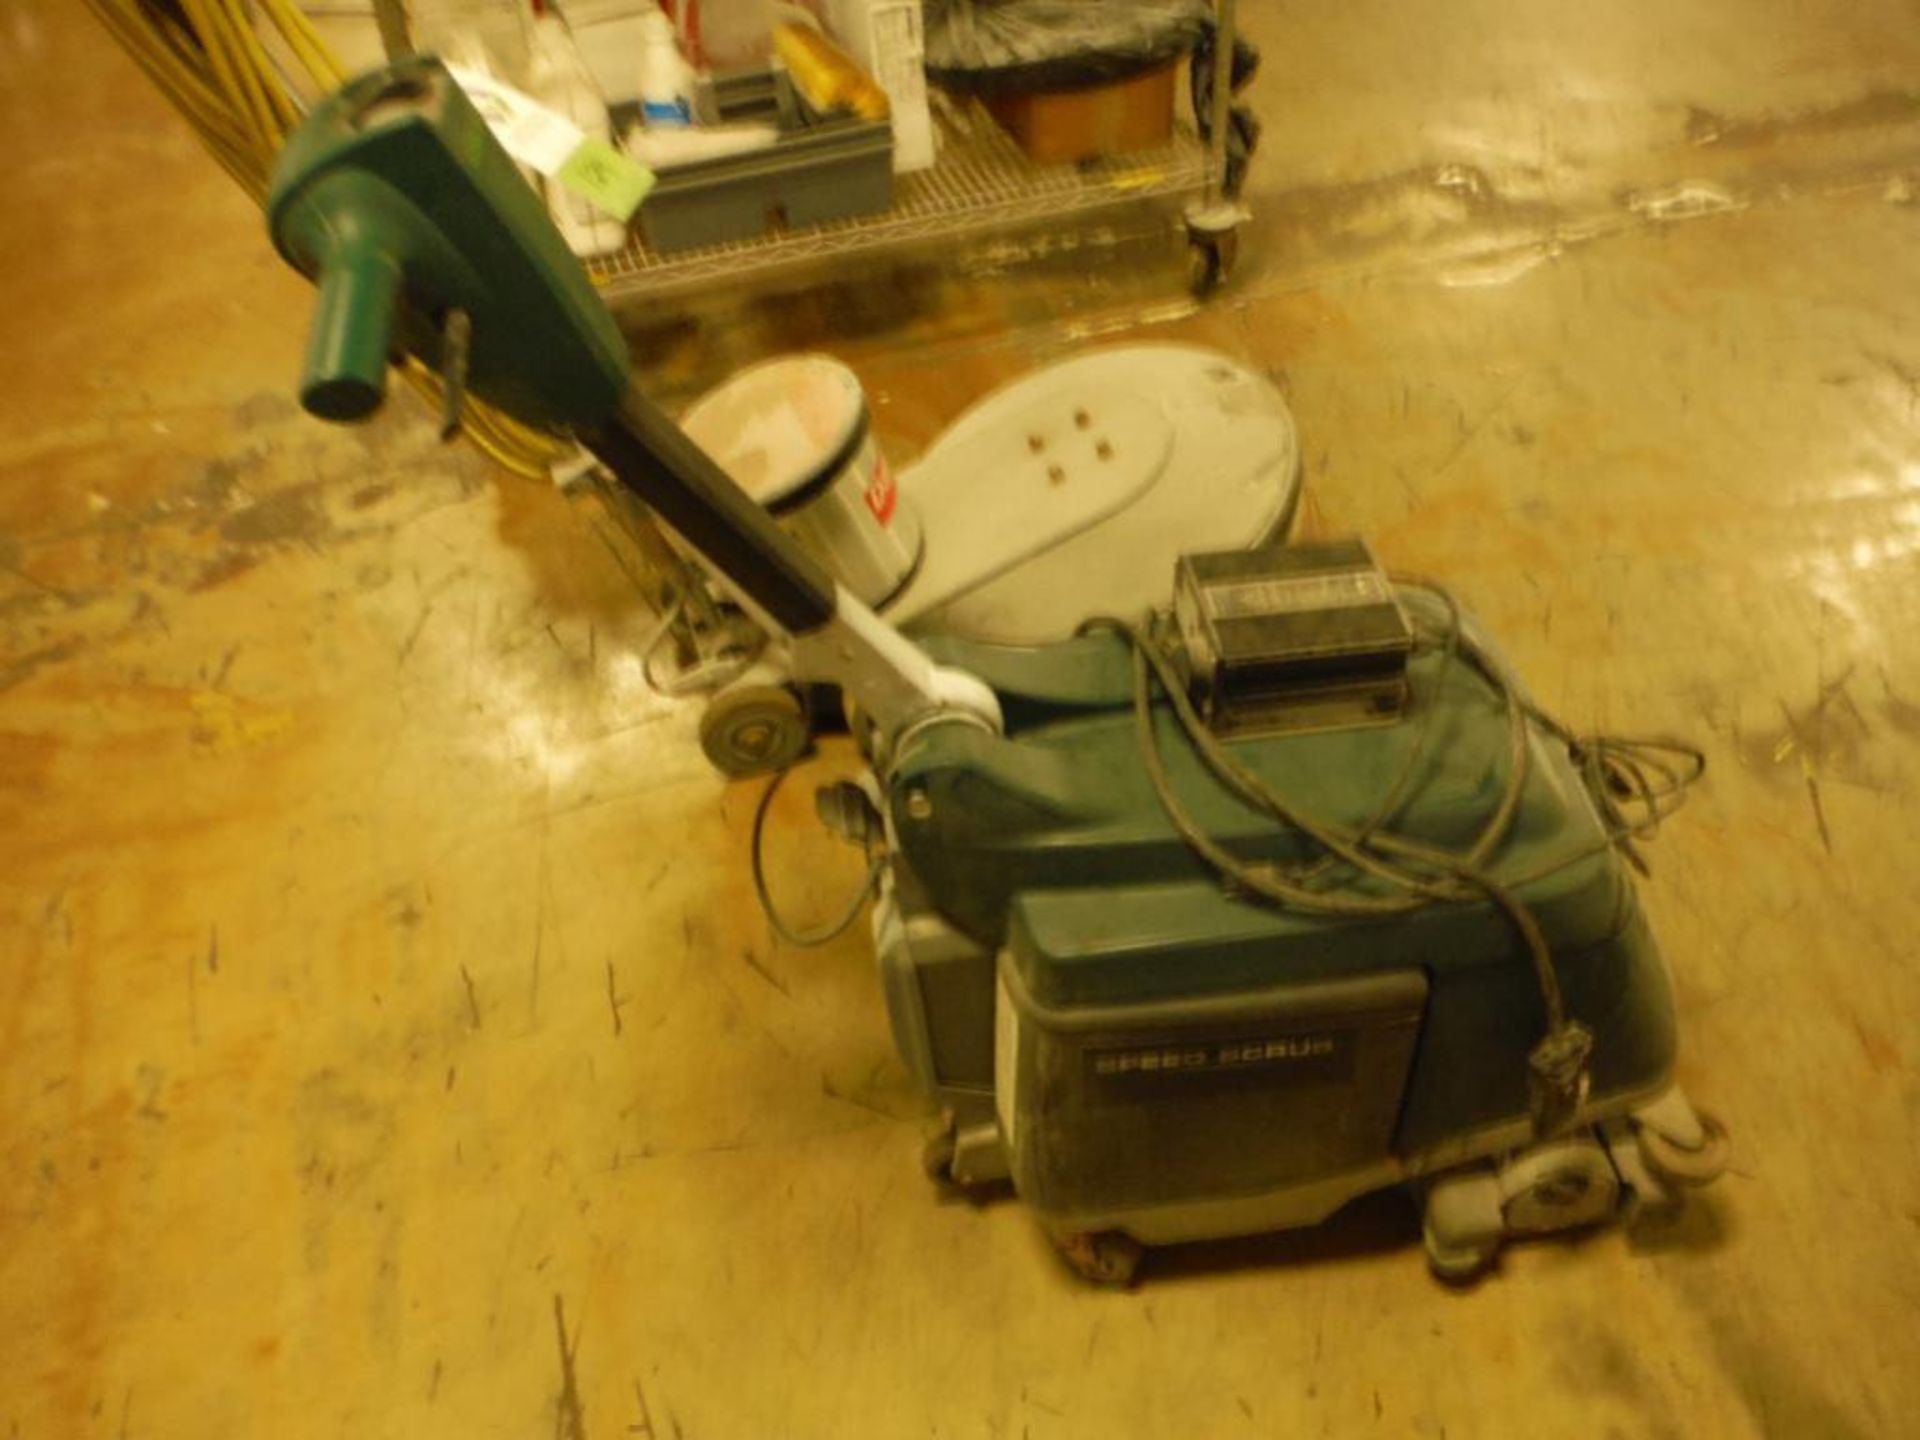 Nobles floor scrubber, Model Speed Scrubber, w/ charger. Rigging Fee: $25 - Image 2 of 6